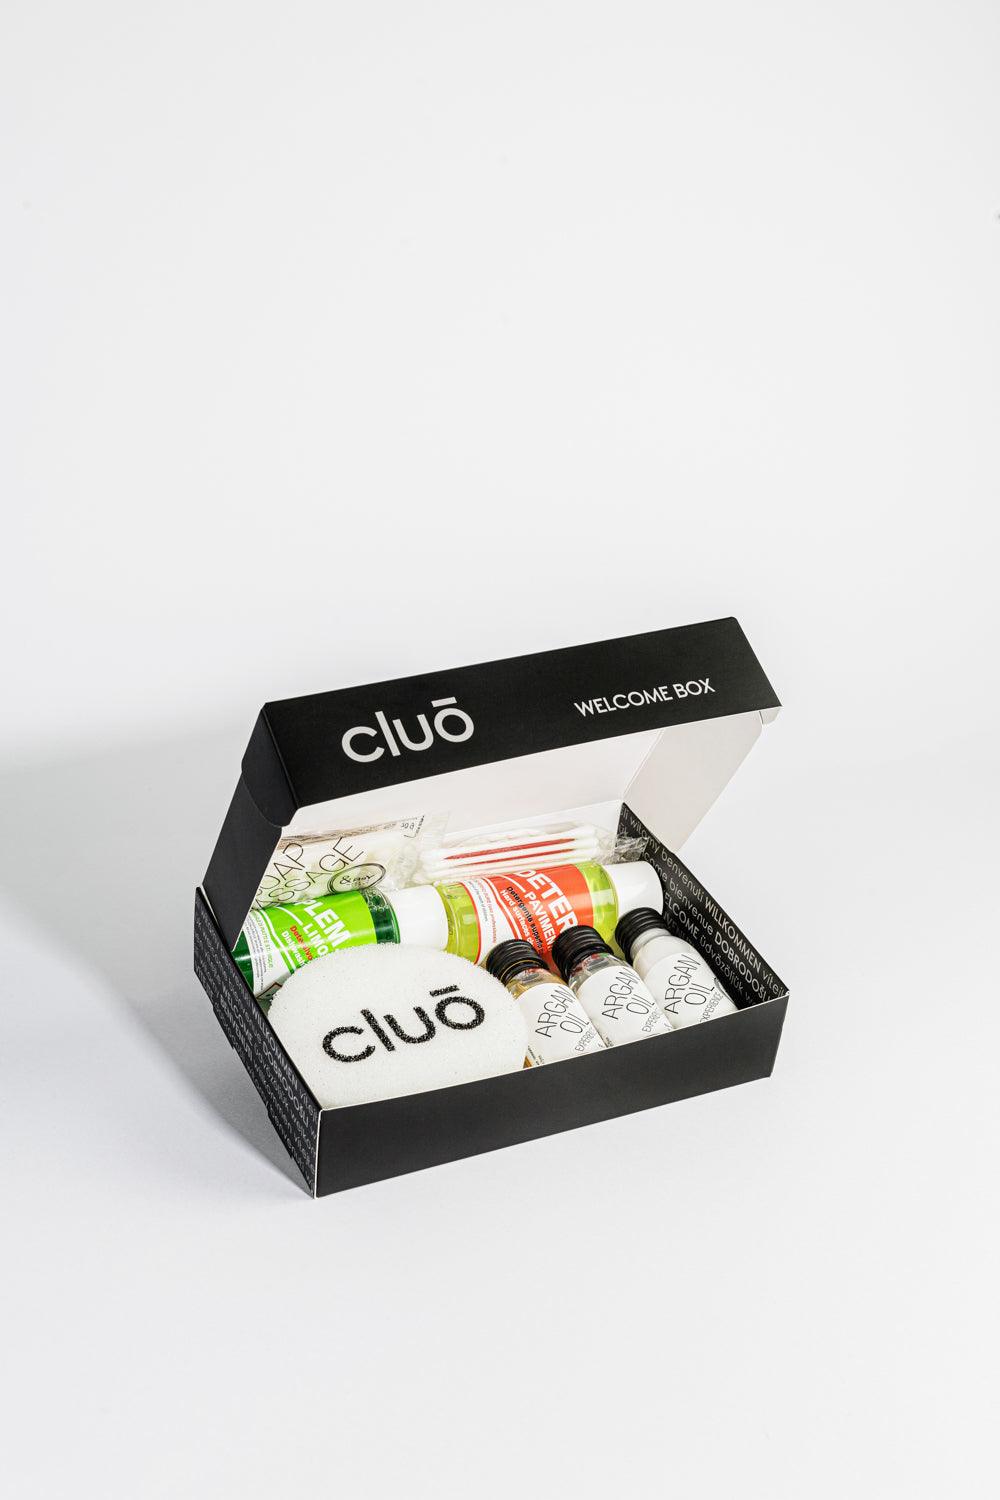 CLUO WELCOME BOX 1 *